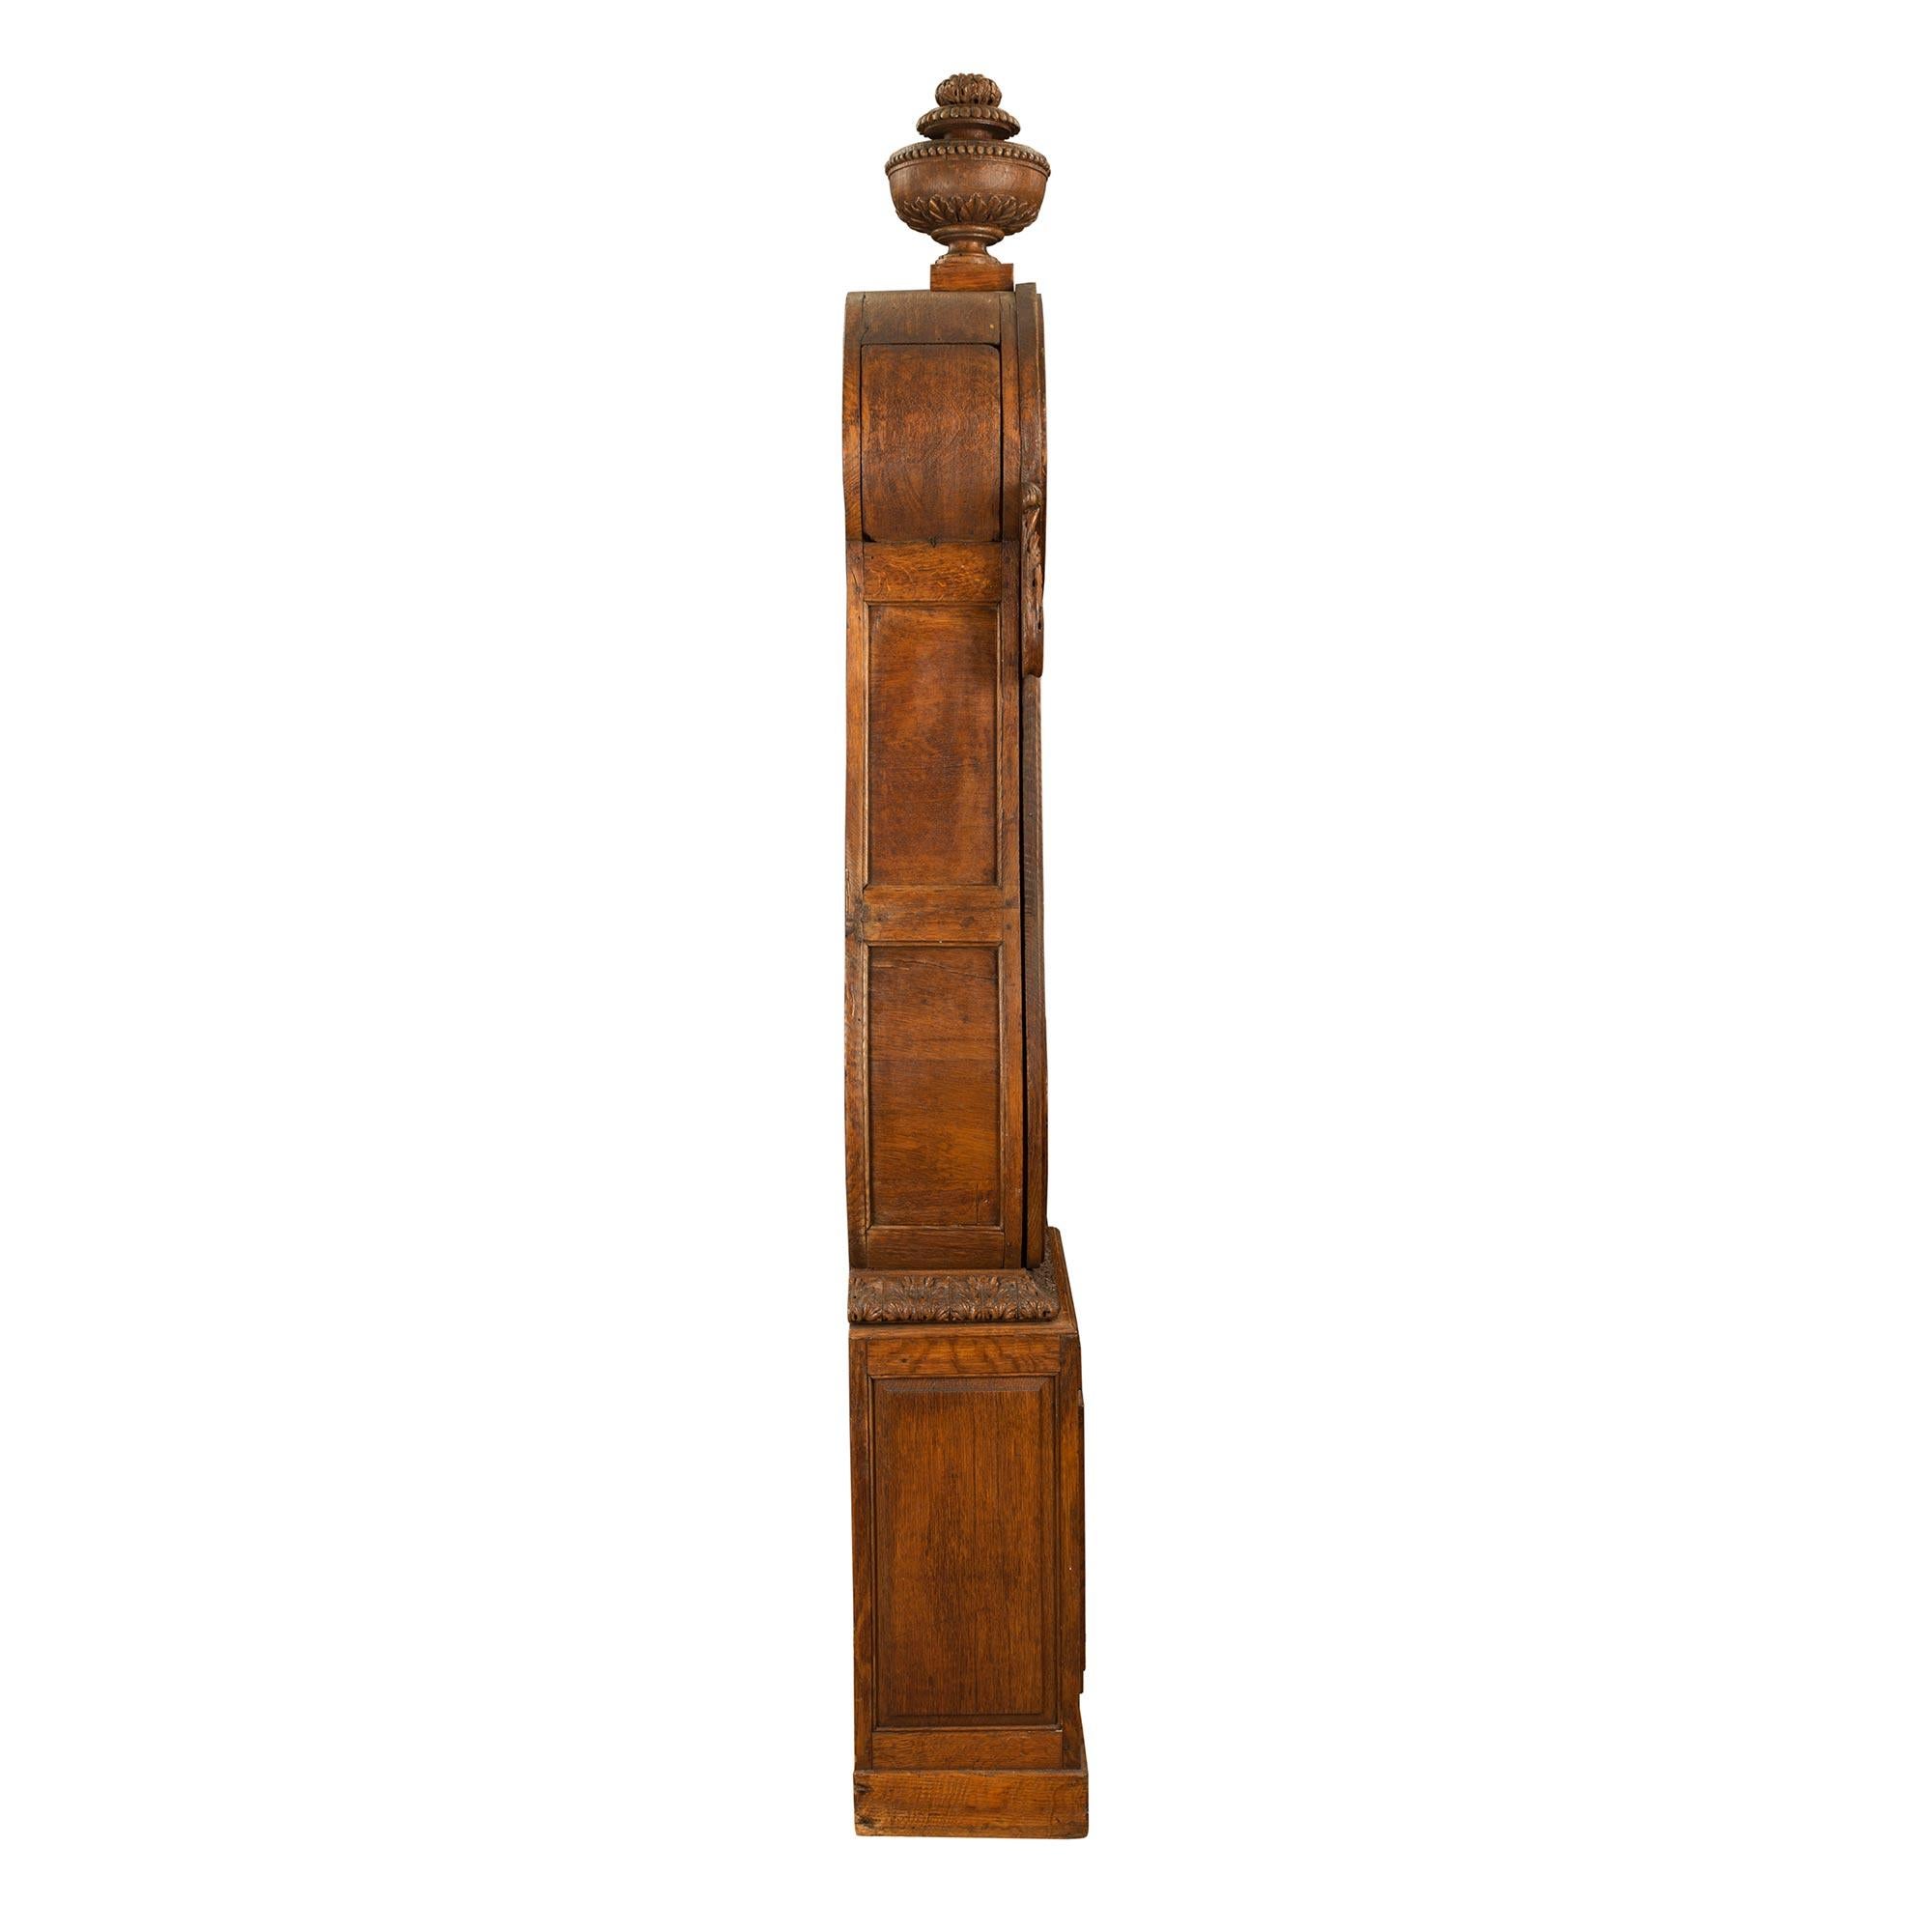 French 18th Century Louis XVI Period Oak Grandfather Clock In Good Condition For Sale In West Palm Beach, FL